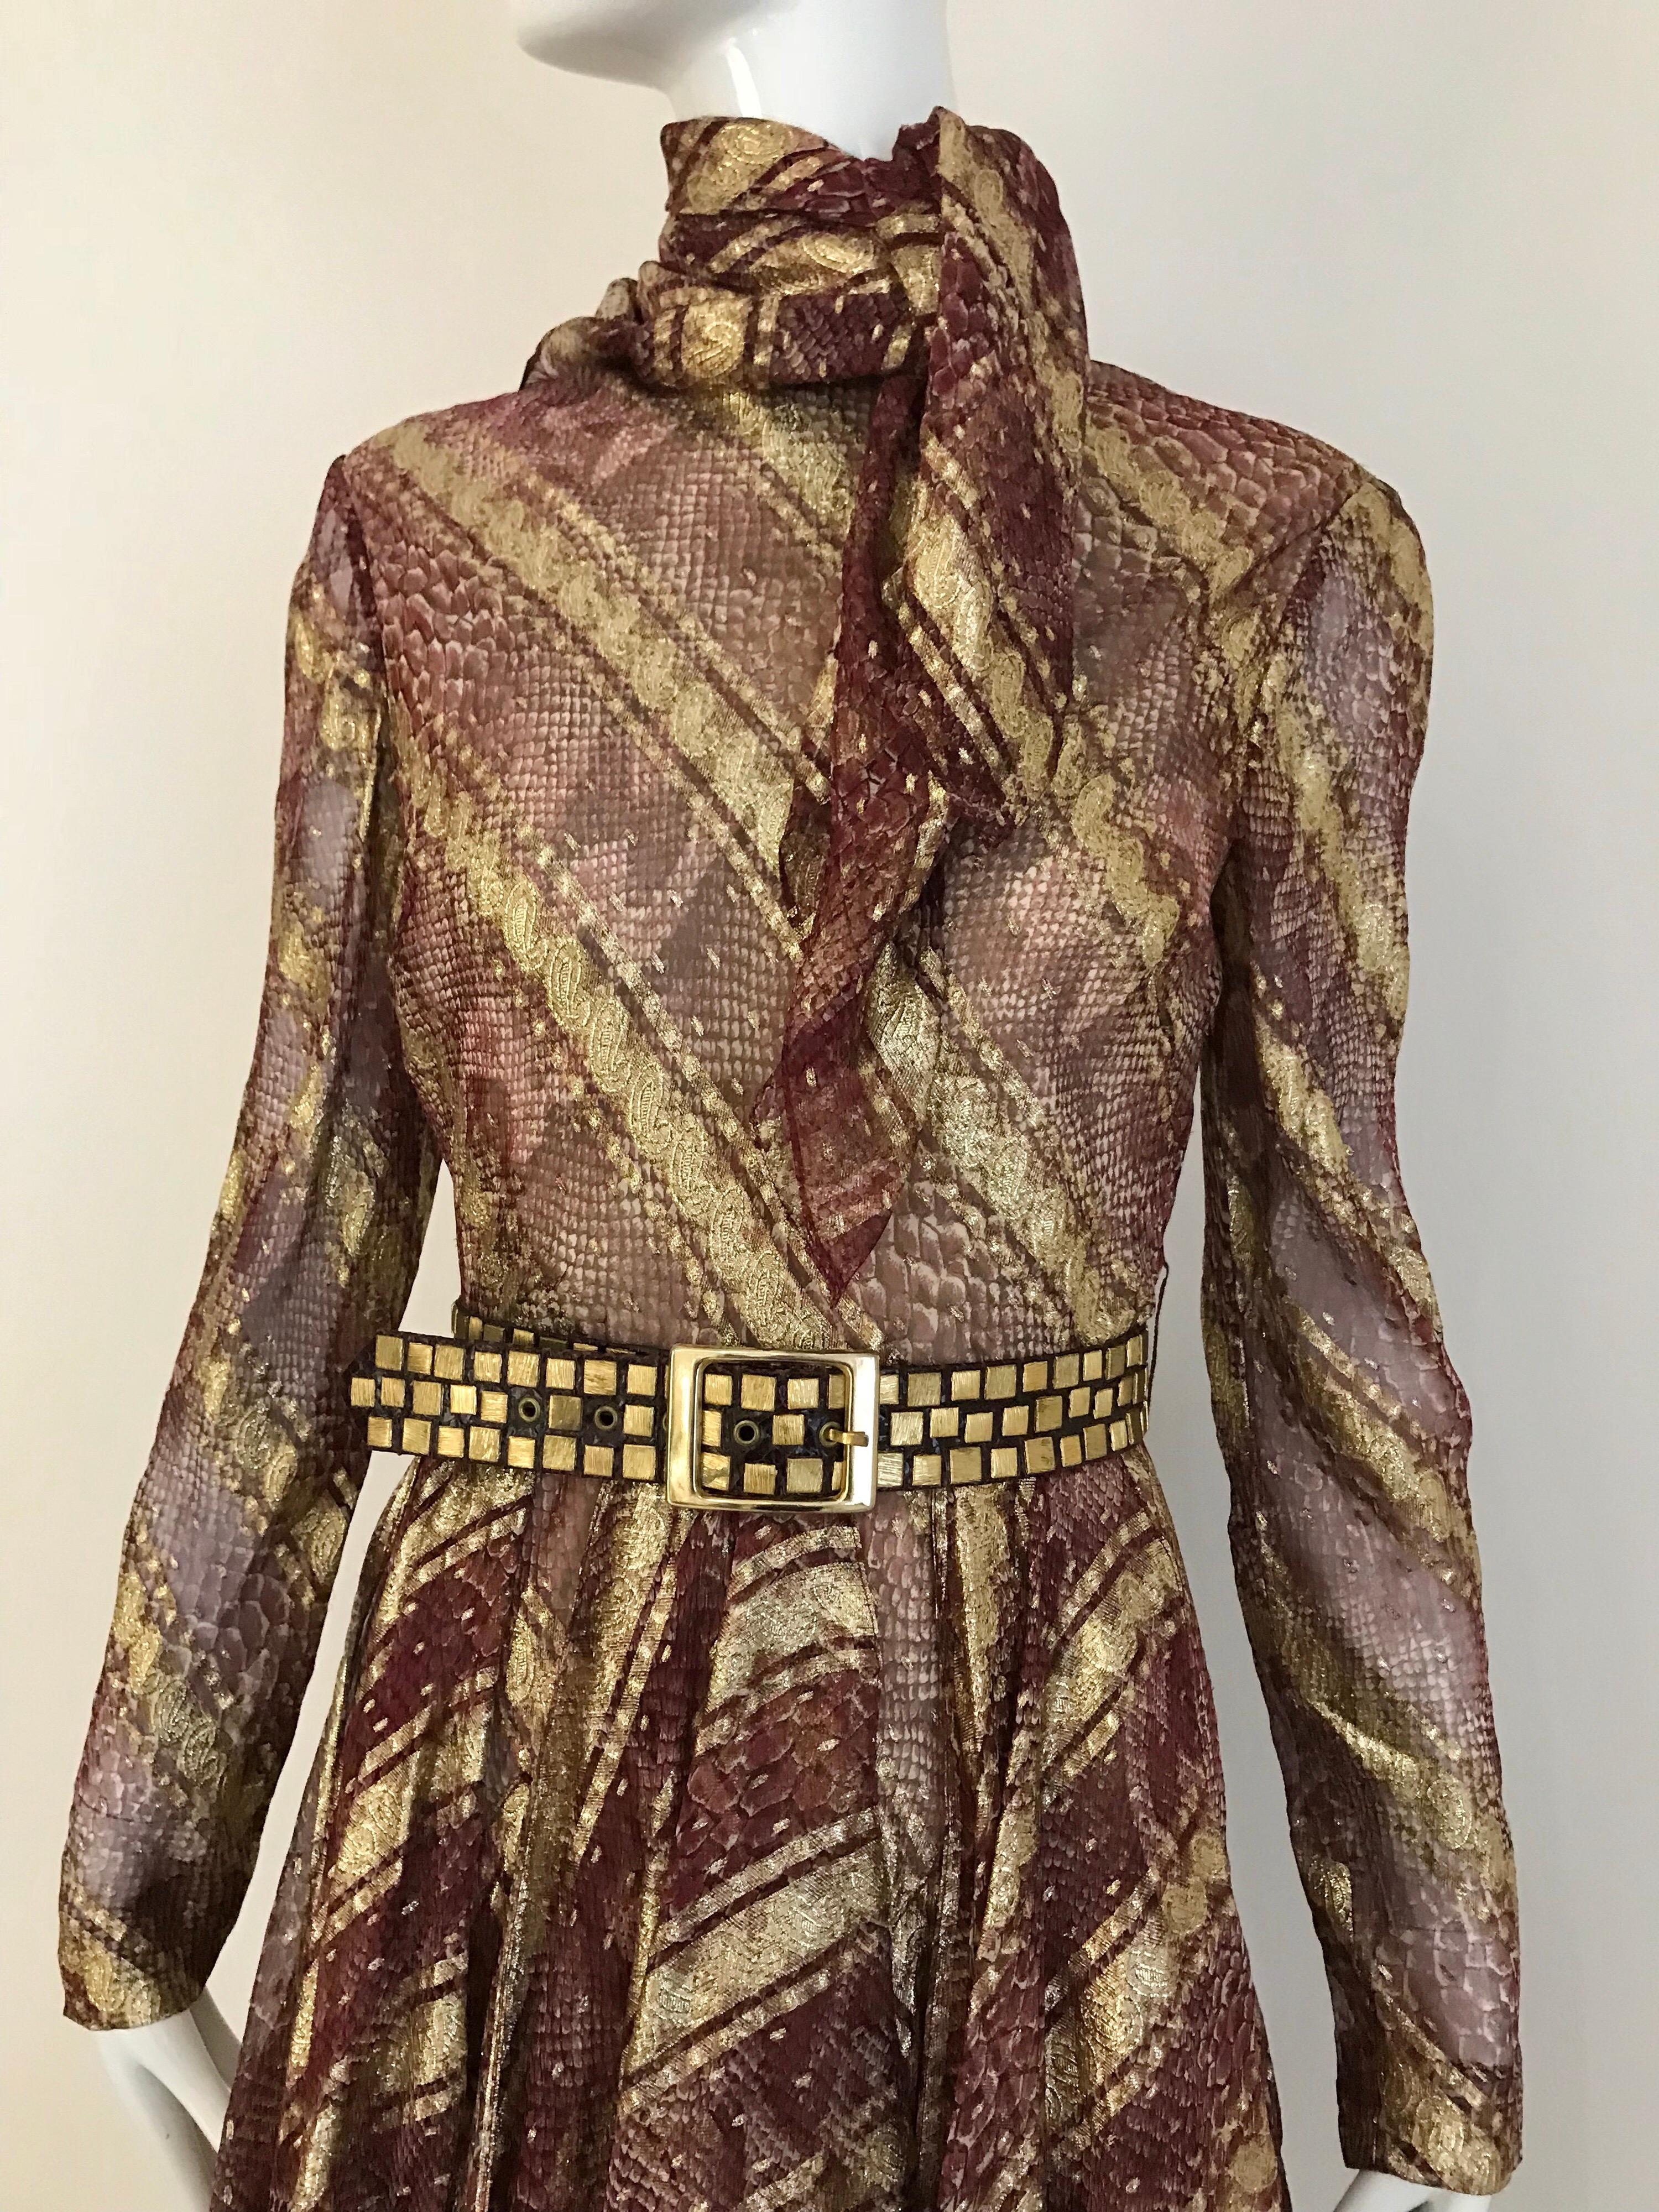 1970s Bill Blass snake skin like print dress in metallic plum and gold with handkerchief hem. Wine colored, printed python chiffon is enhanced with stripes of gold paisely trim.
Dress comes with belt and detachable silk scarf. Perfect cocktail